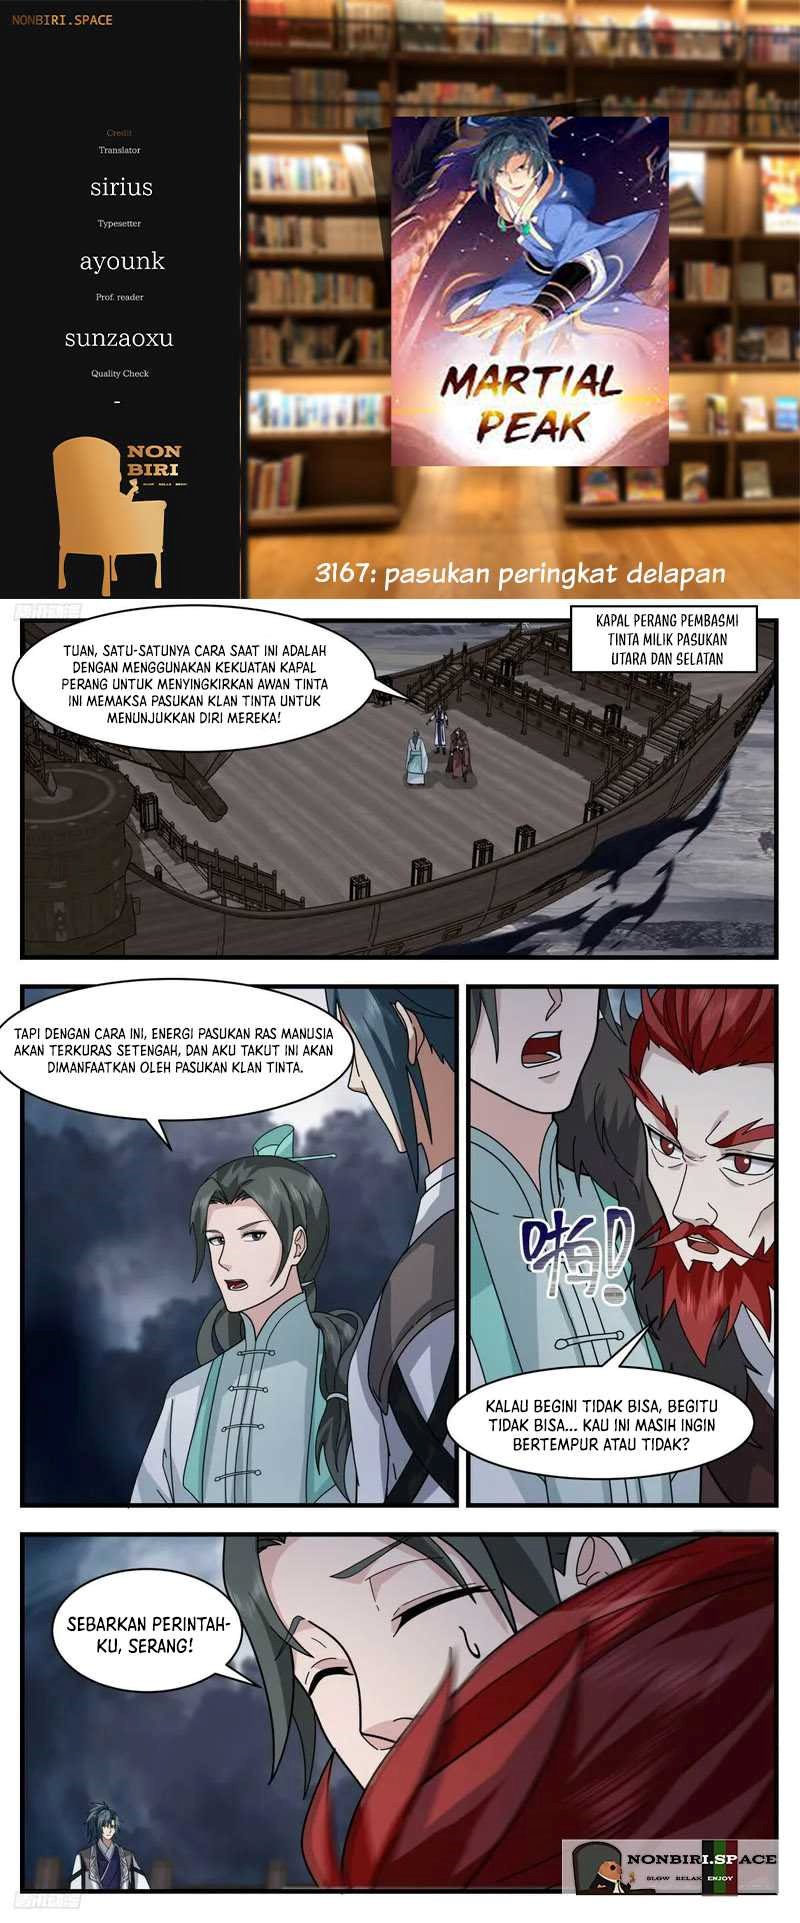 Martial Peak: Chapter 3167 - Page 1